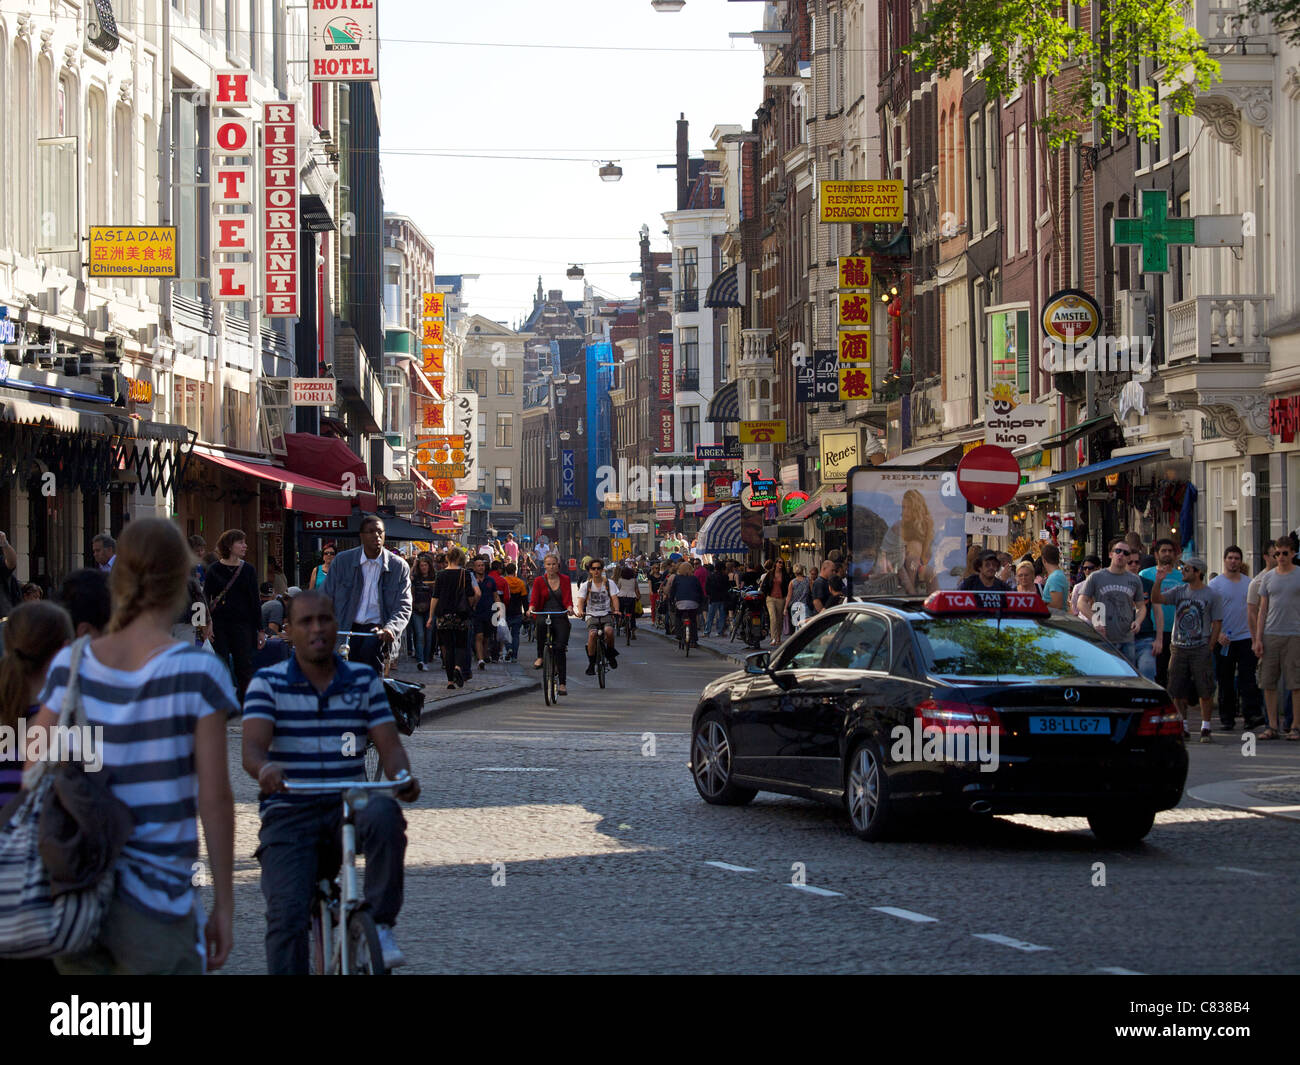 Damstraat Dam street with many people and taxi in Amsterdam, the Netherlands Stock Photo